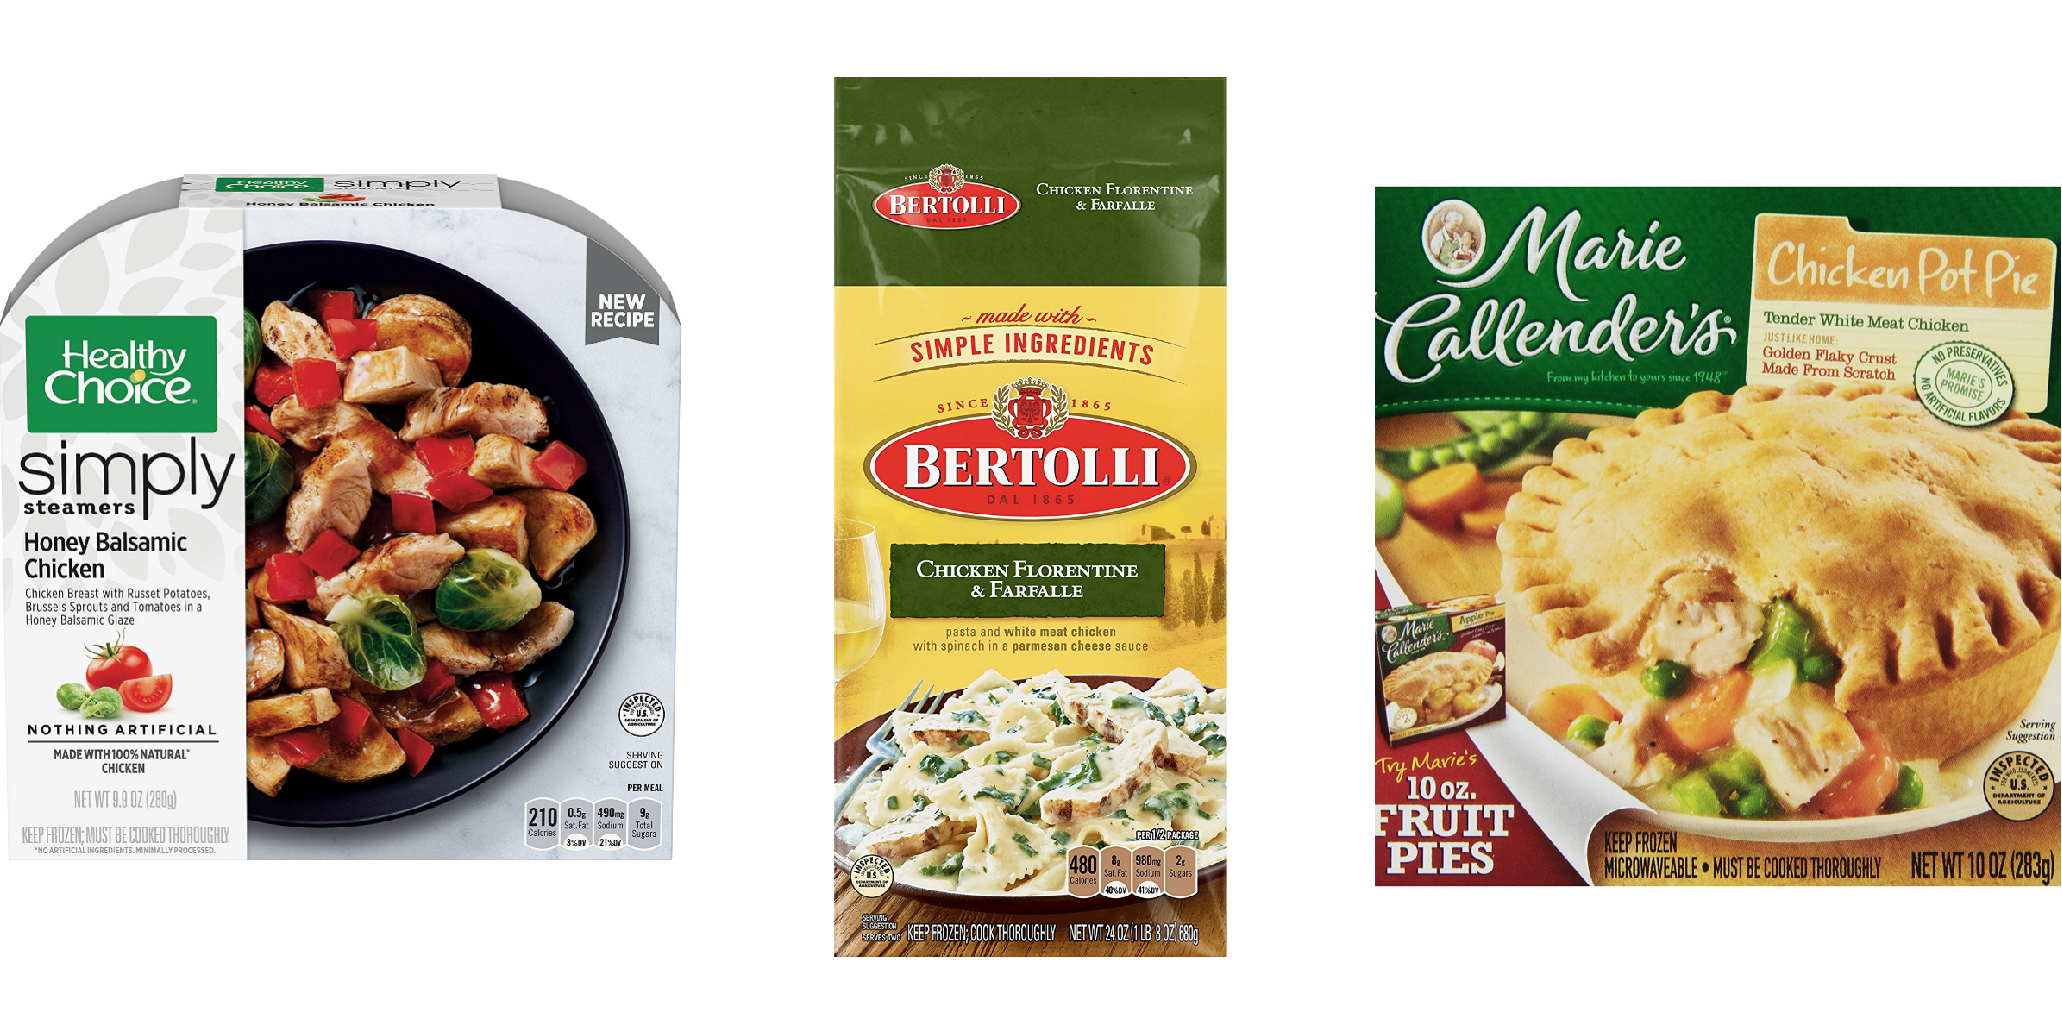 The Best Frozen Meals You Can Buy